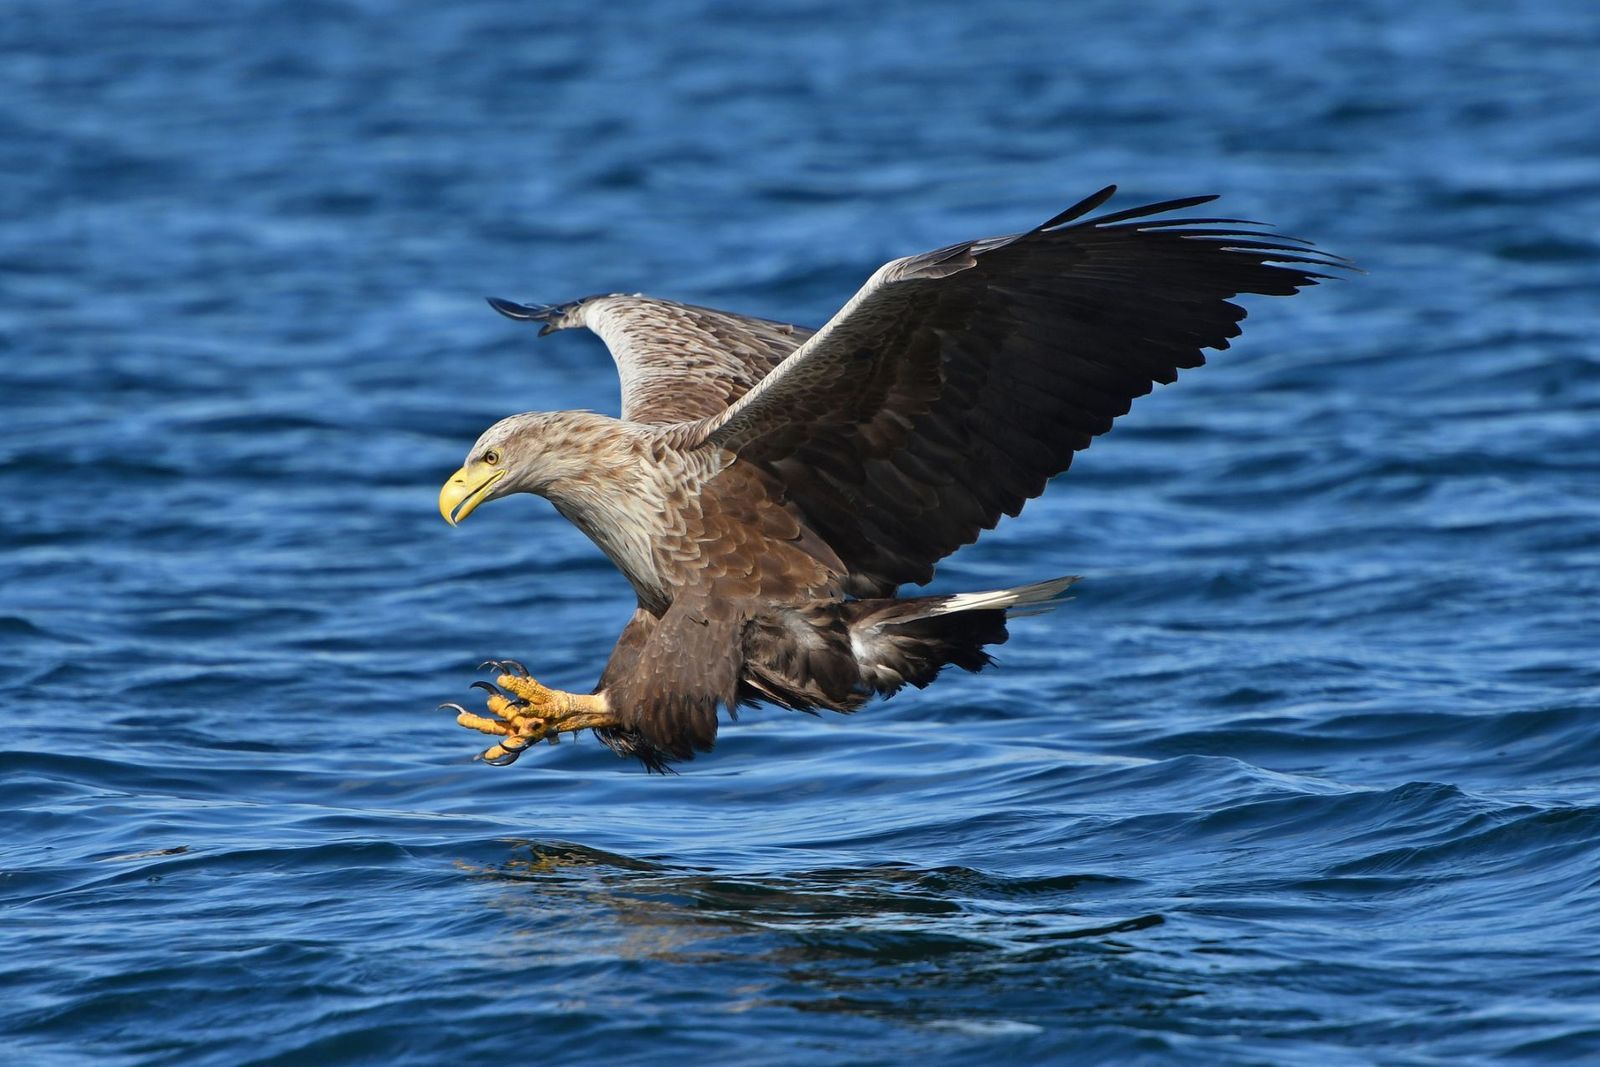 Sea eagles have been back in Mull since the 1970s, and have brought in huge benefits for local communities. Photo: Getty